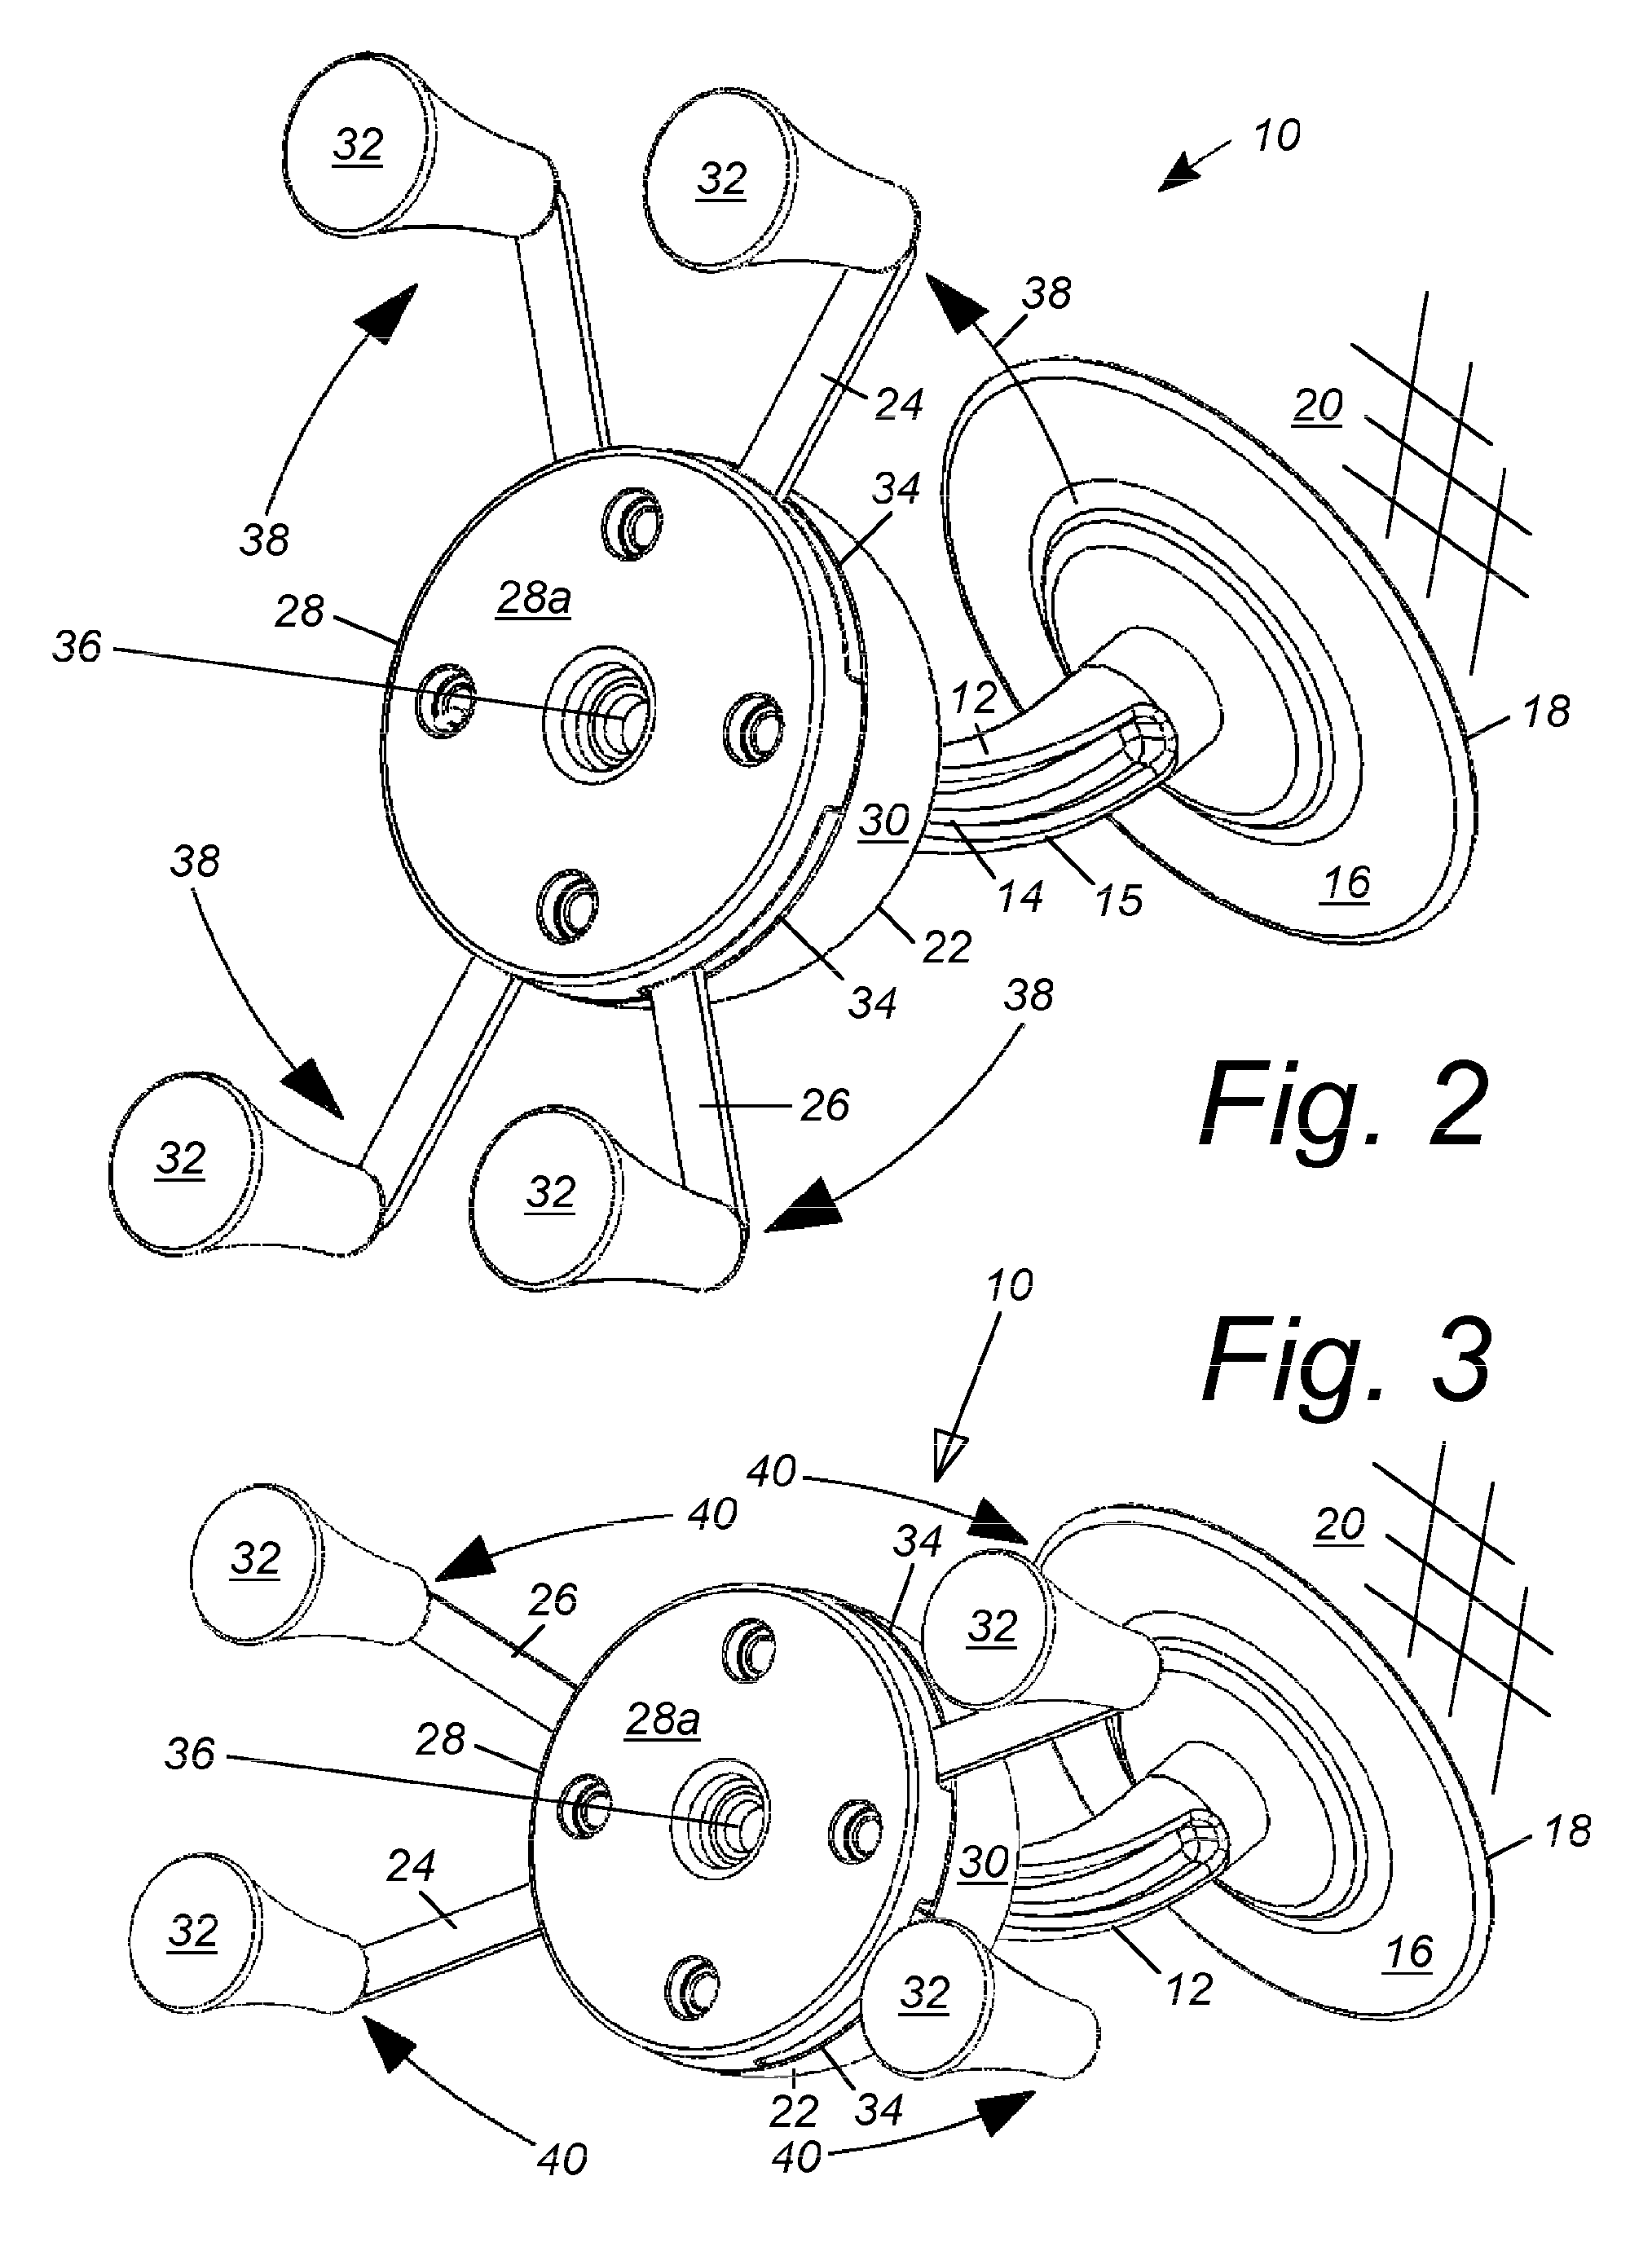 Method for mounting a portable device